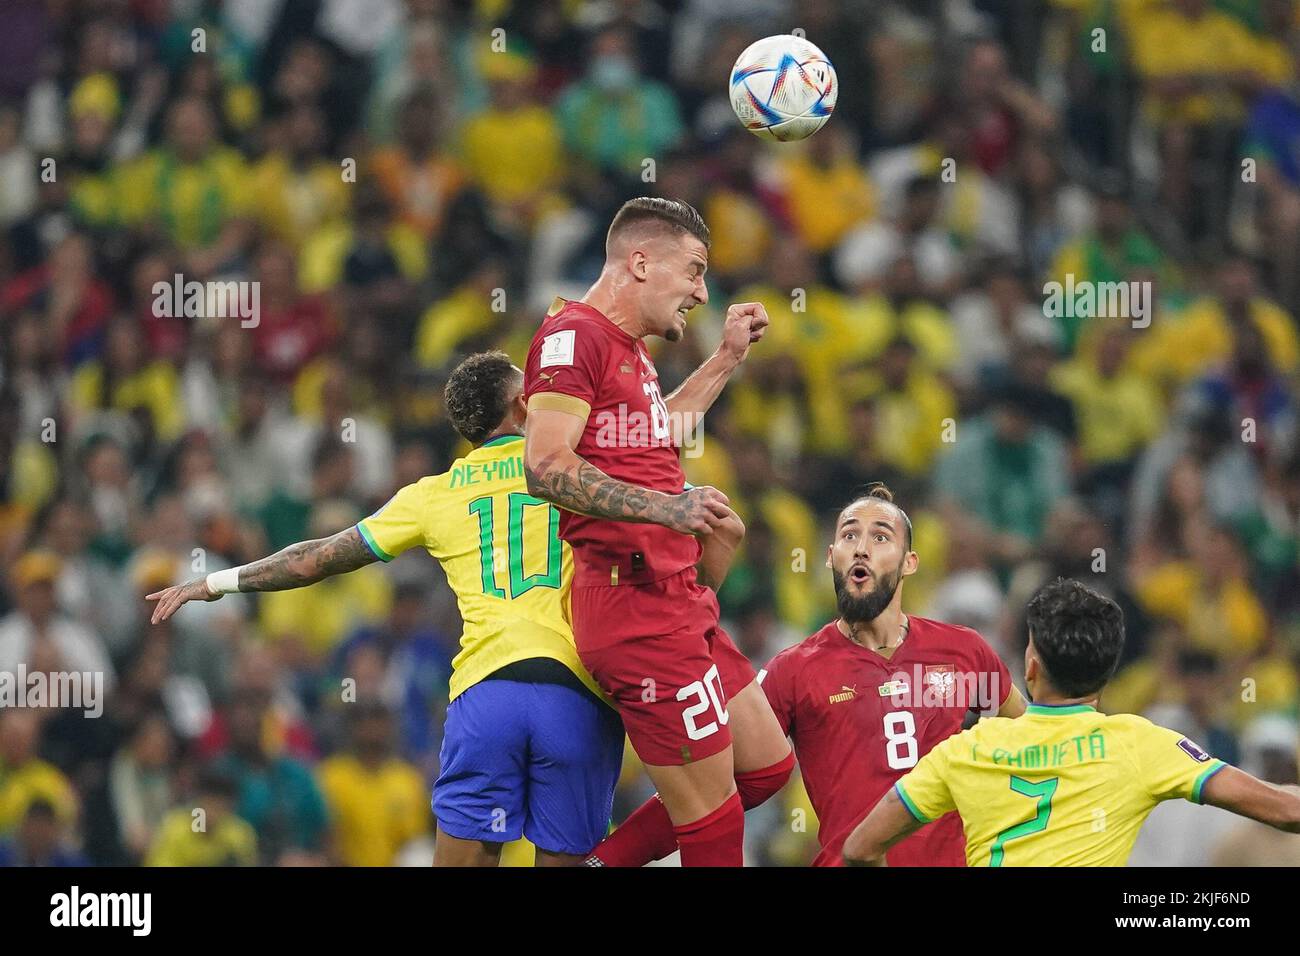 LUSAIL, QATAR - NOVEMBER 24: Player of Brazil Neymar fights for the ball with player of Serbia Sergej Milinkovic-Savic during the FIFA World Cup Qatar 2022 group G match between Brazil and Serbia at Lusail Stadium on November 24, 2022 in Lusail, Qatar. (Photo by Florencia Tan Jun/PxImages) Credit: Px Images/Alamy Live News Stock Photo